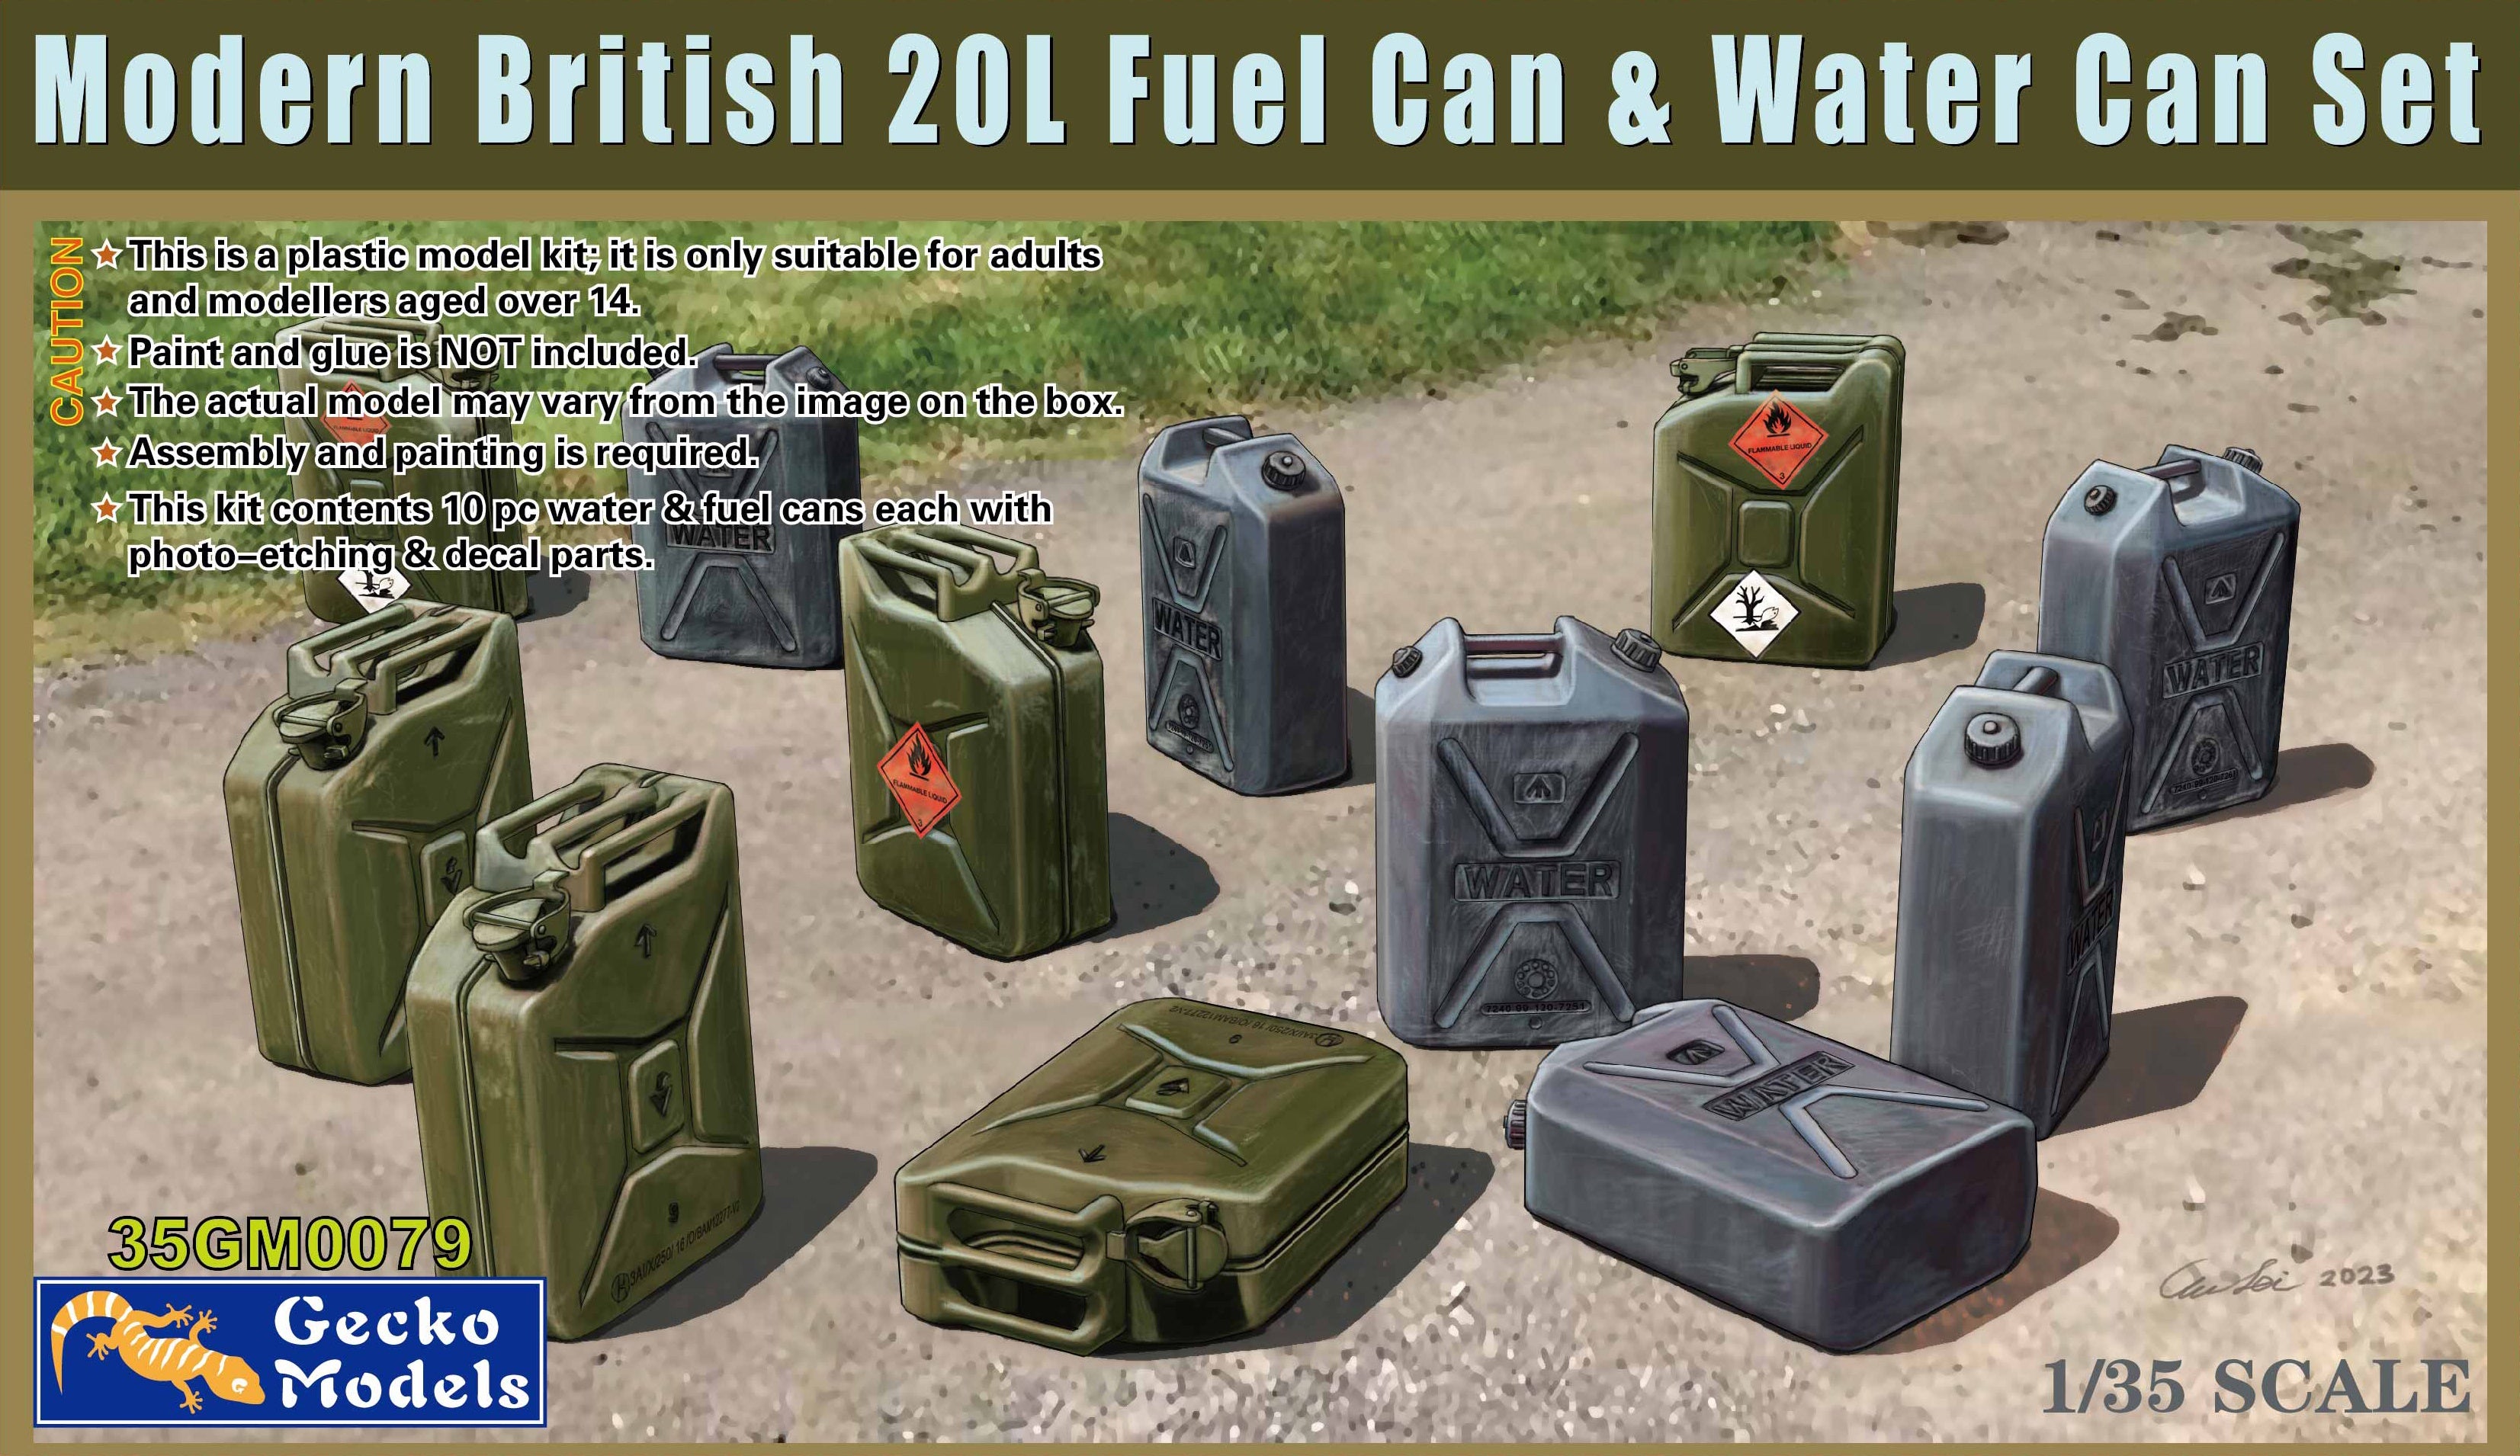 Modern British 20L Fuel Can & Water Can Set 1/35 #35GM0079 by Gecko